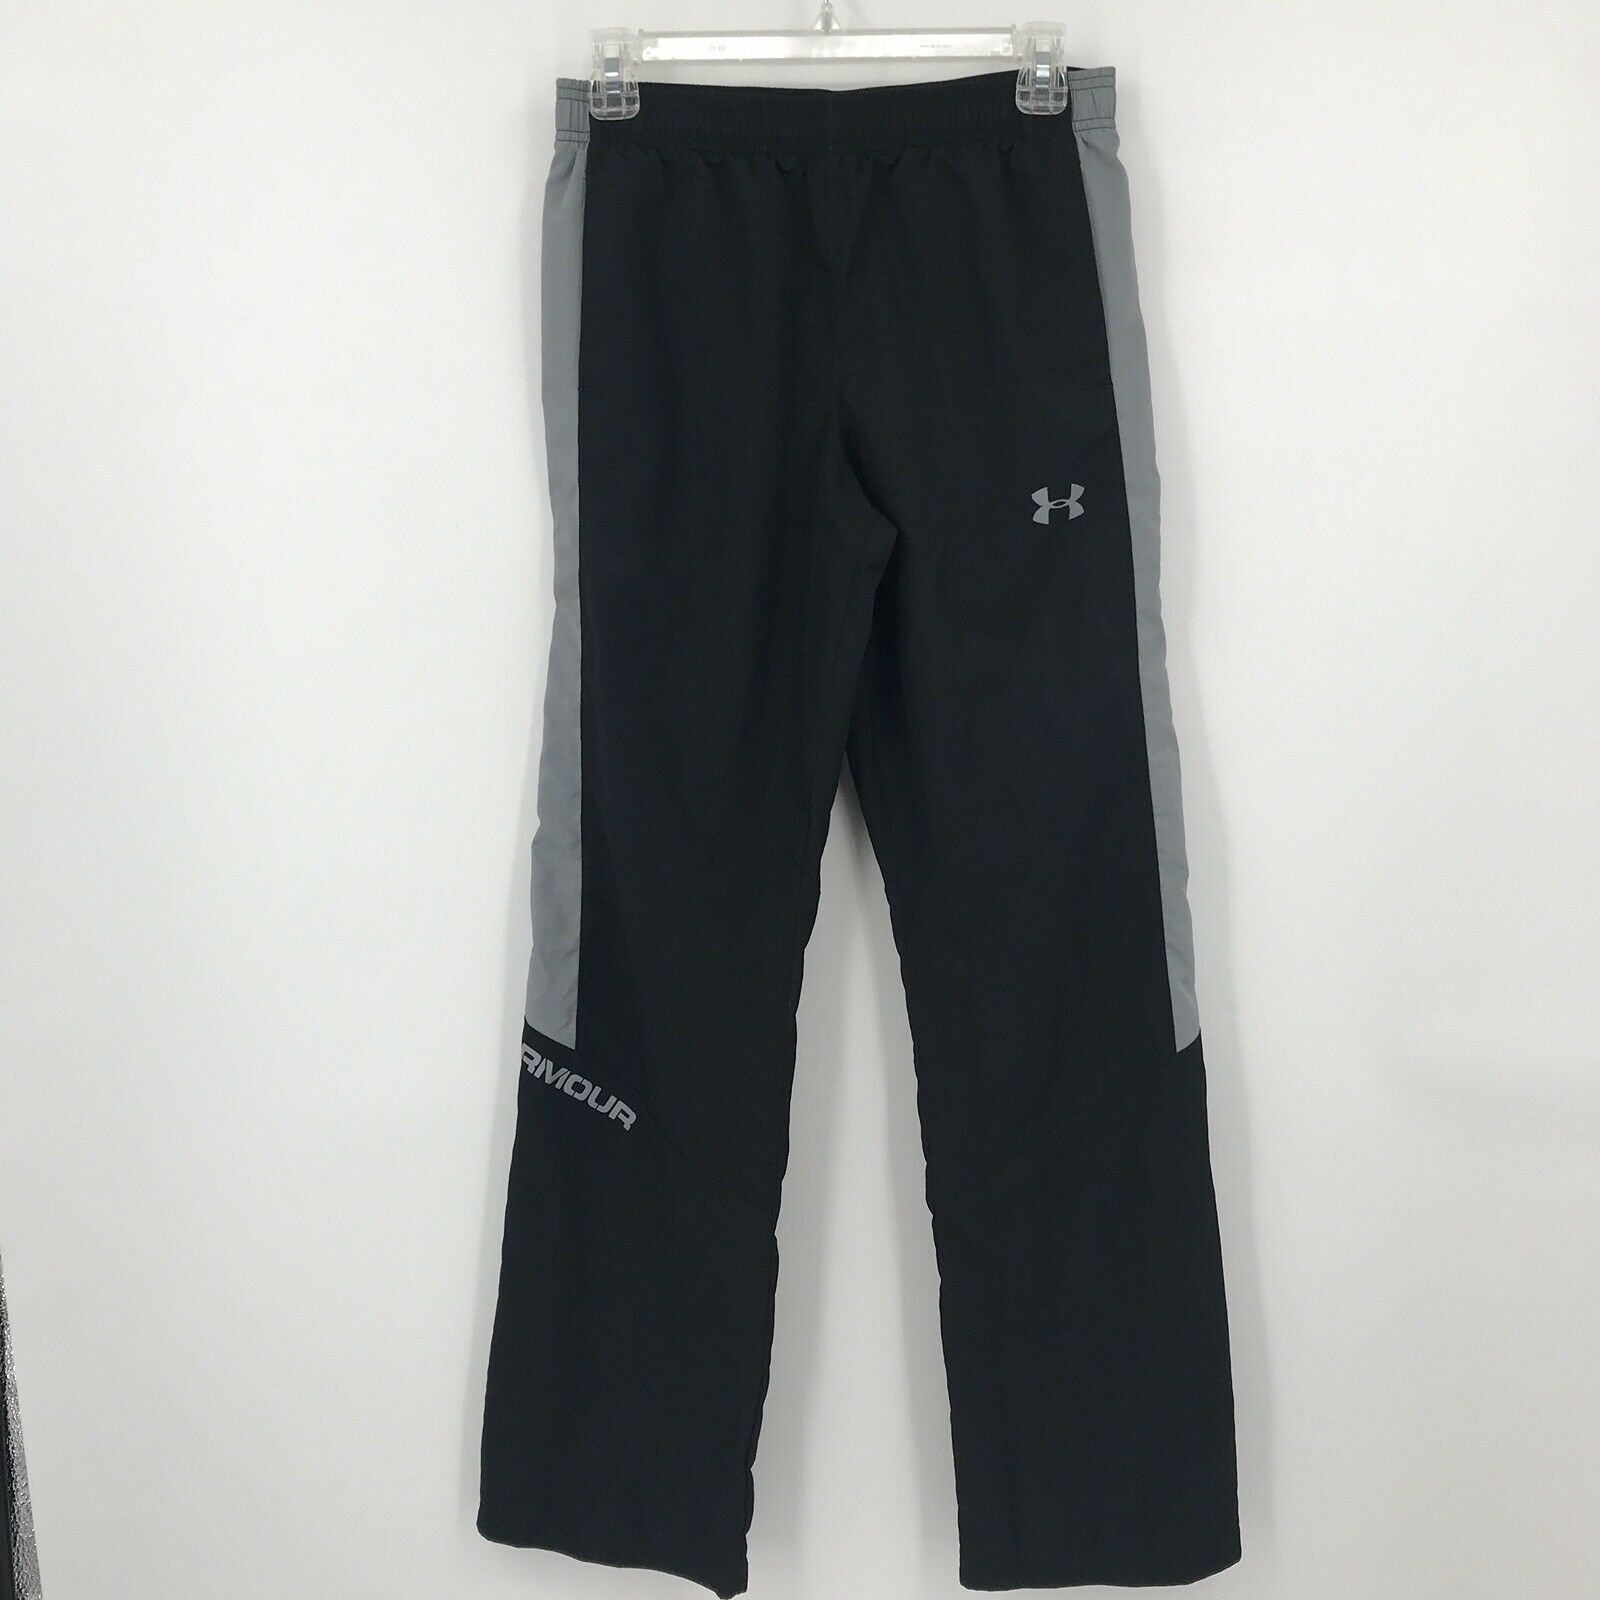 Under Armour Youth Size Large Ylg Main Enforcer Woven Athletic Pants 1259710